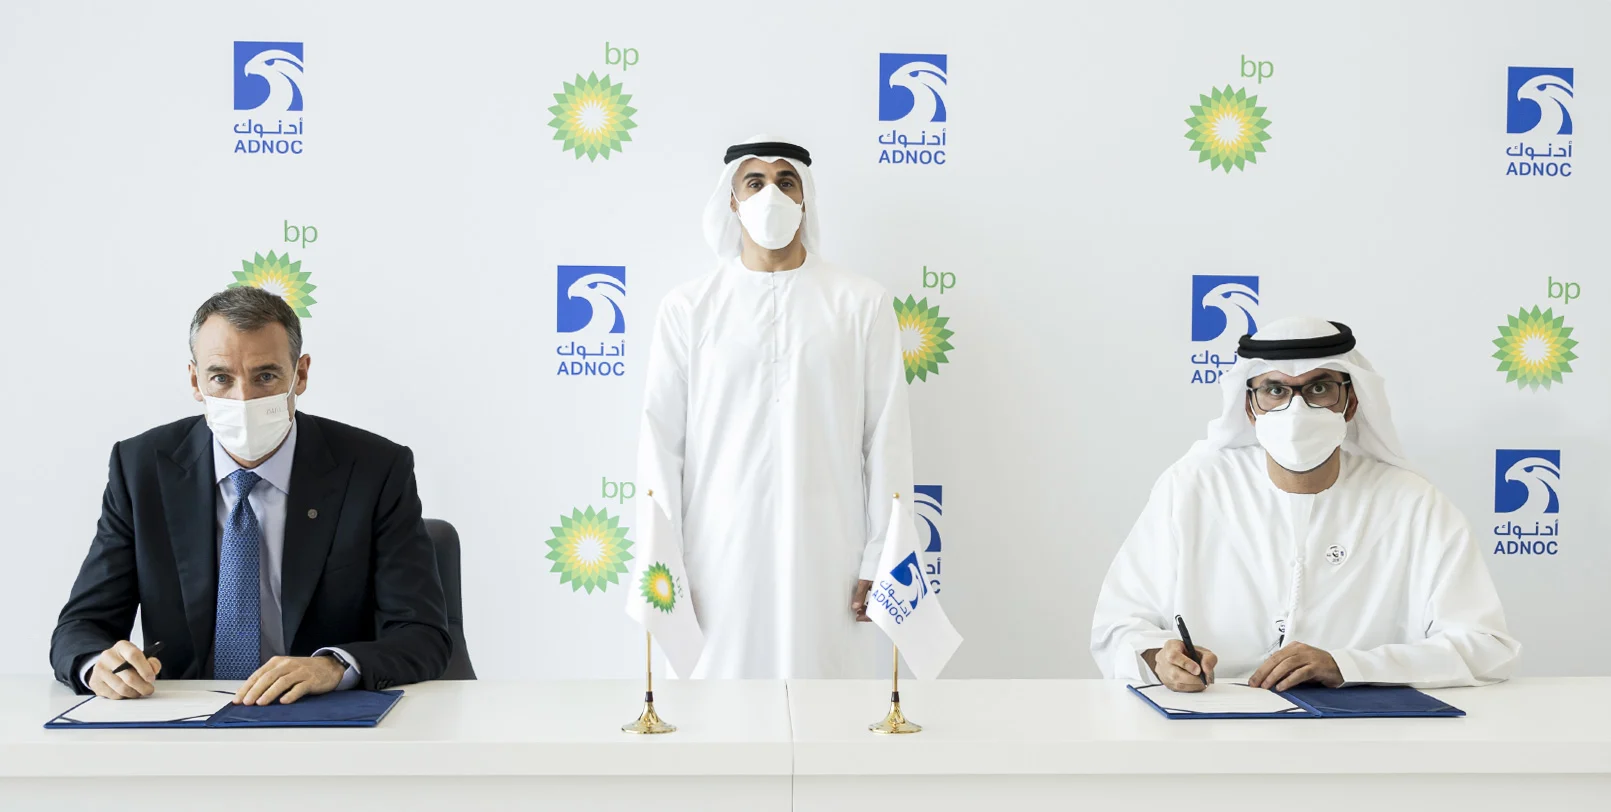 bp CEO Bernard Looney and H.E. Dr. Sultan Ahmed Al Jaber, ADNOC managing director and group CEO and Masdar chairman, sign the deal